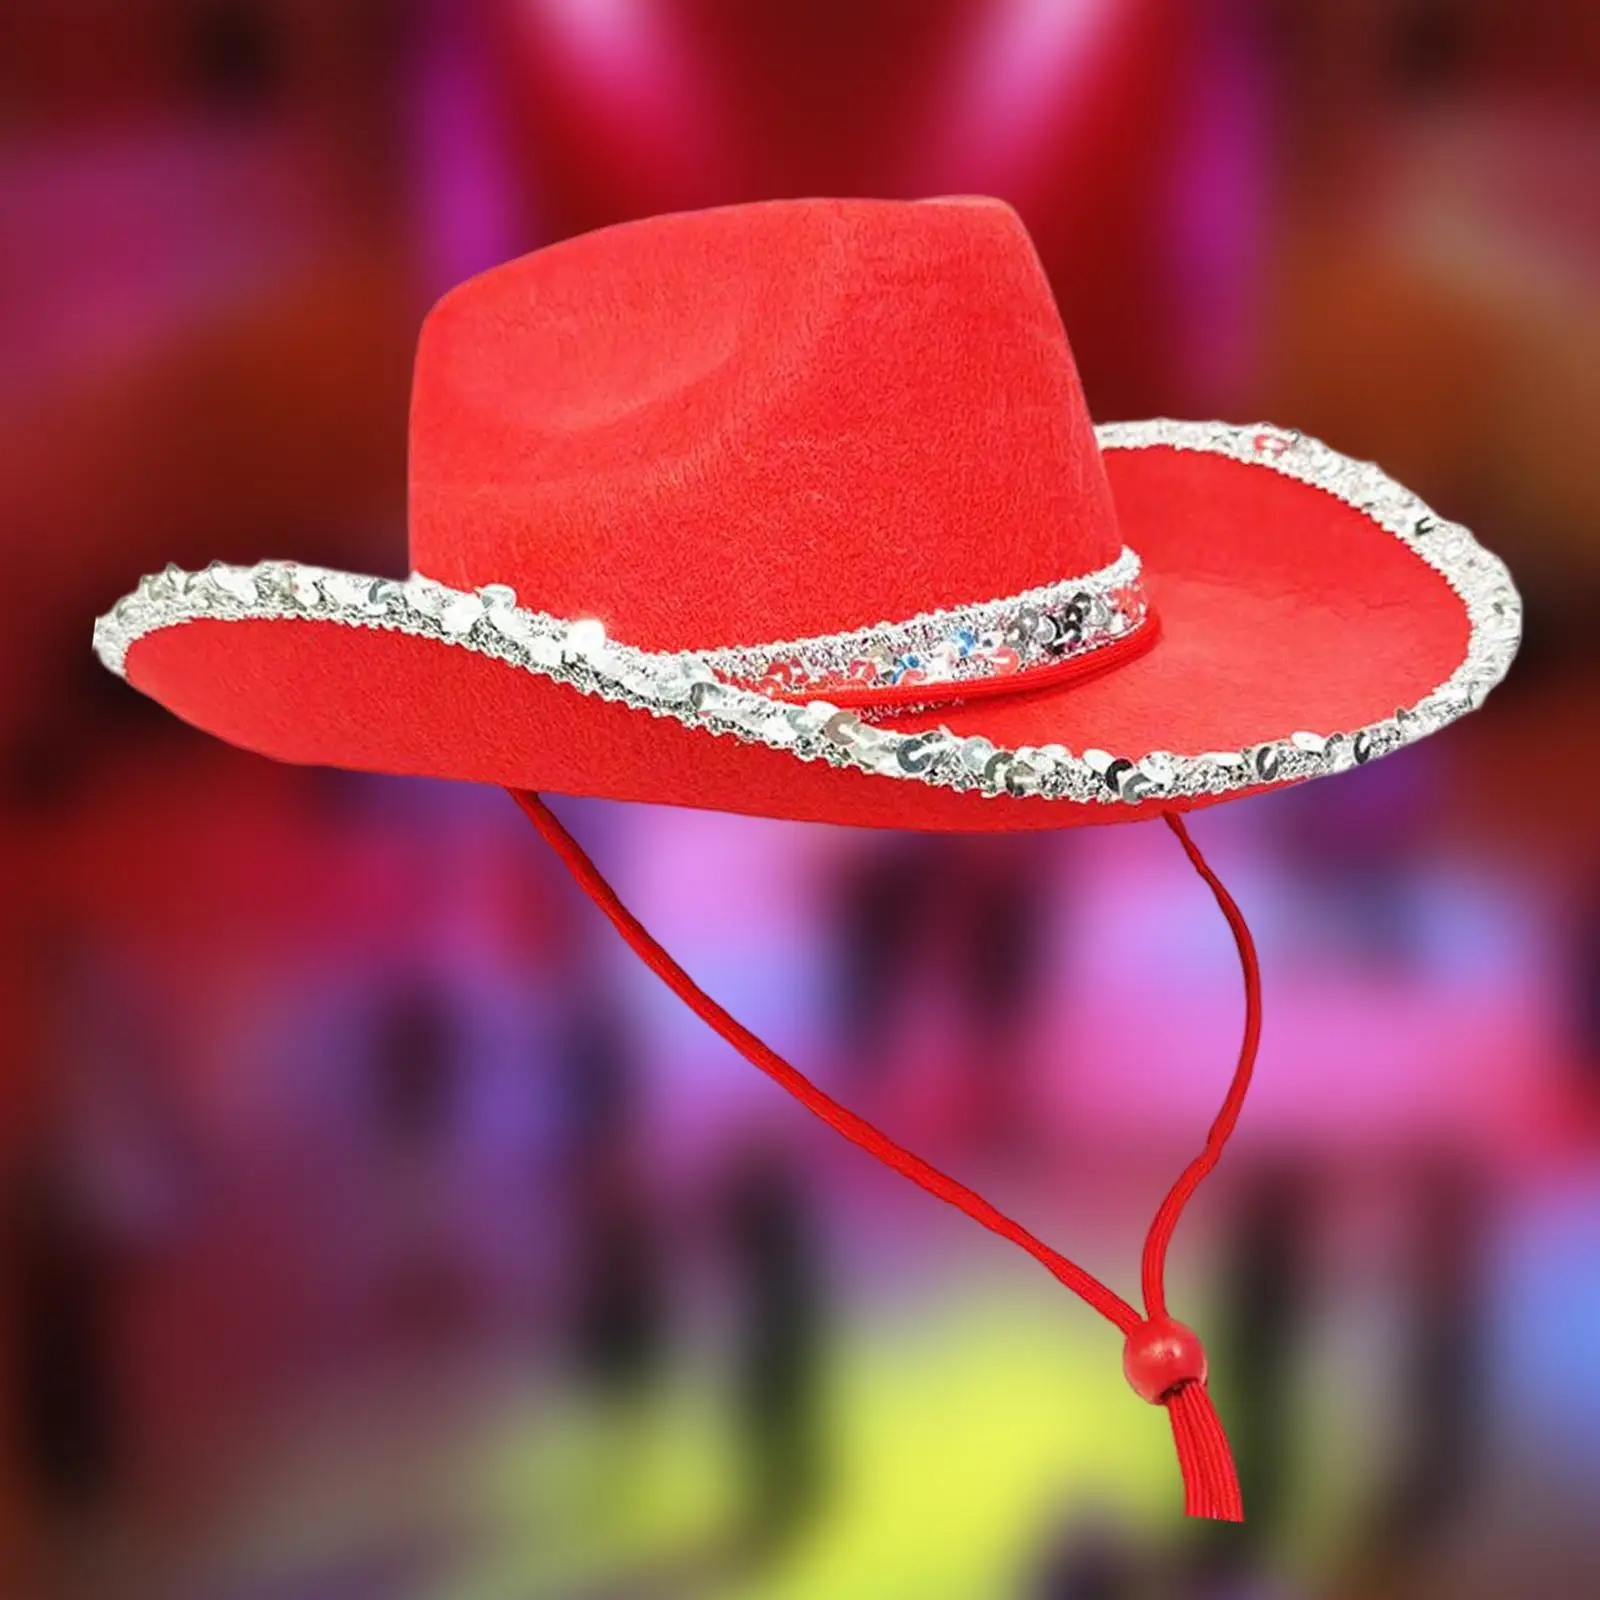 Western Style Cowboy Hat Fedora Hat Novelty Sunhat Cowgirl Hat for Carnival Halloween Party Costumes Accessories Role Play